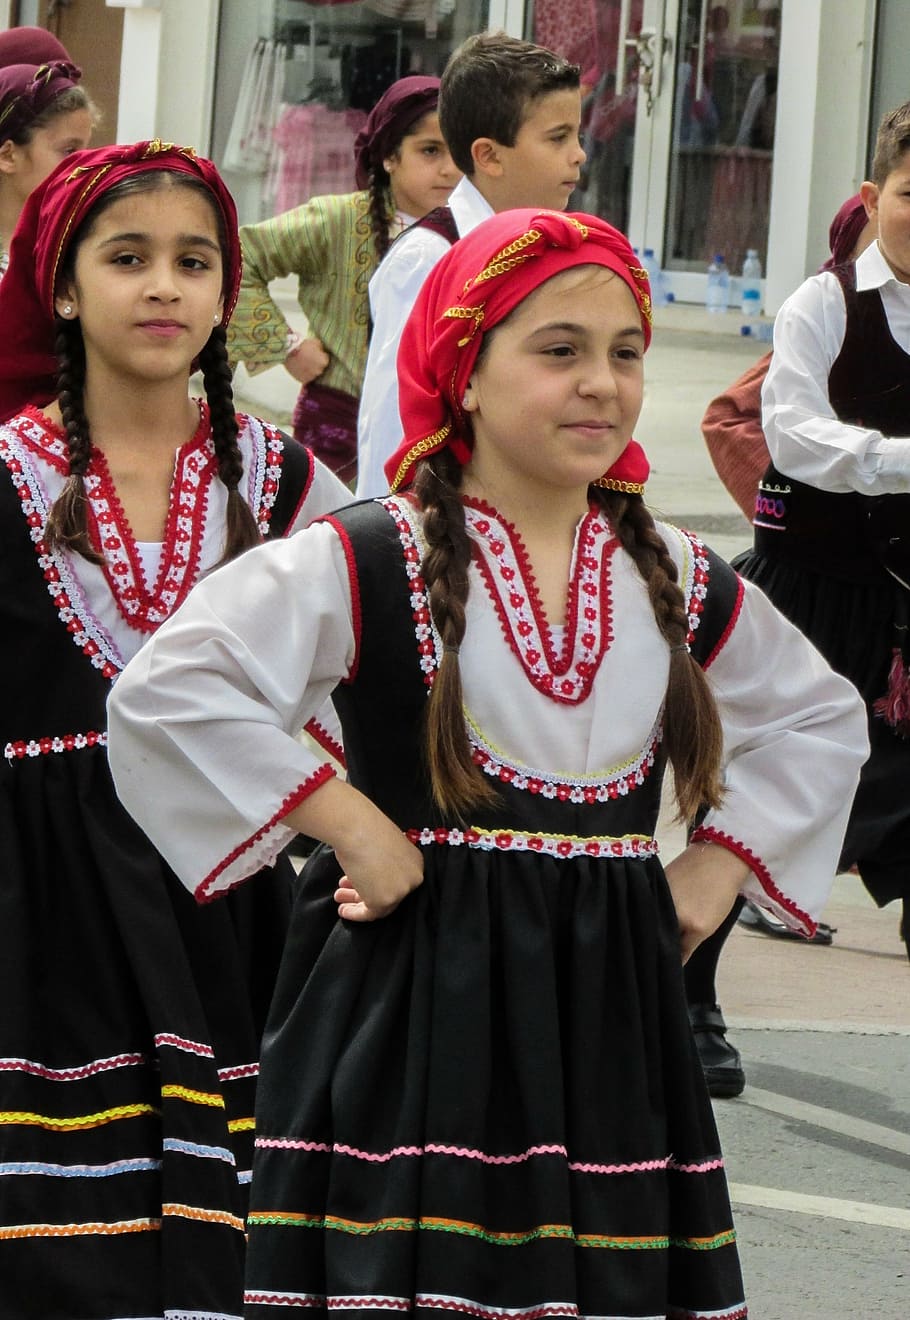 greek independence day, parade, kids, marching, traditional, costume, cyprus, real people, lifestyles, standing